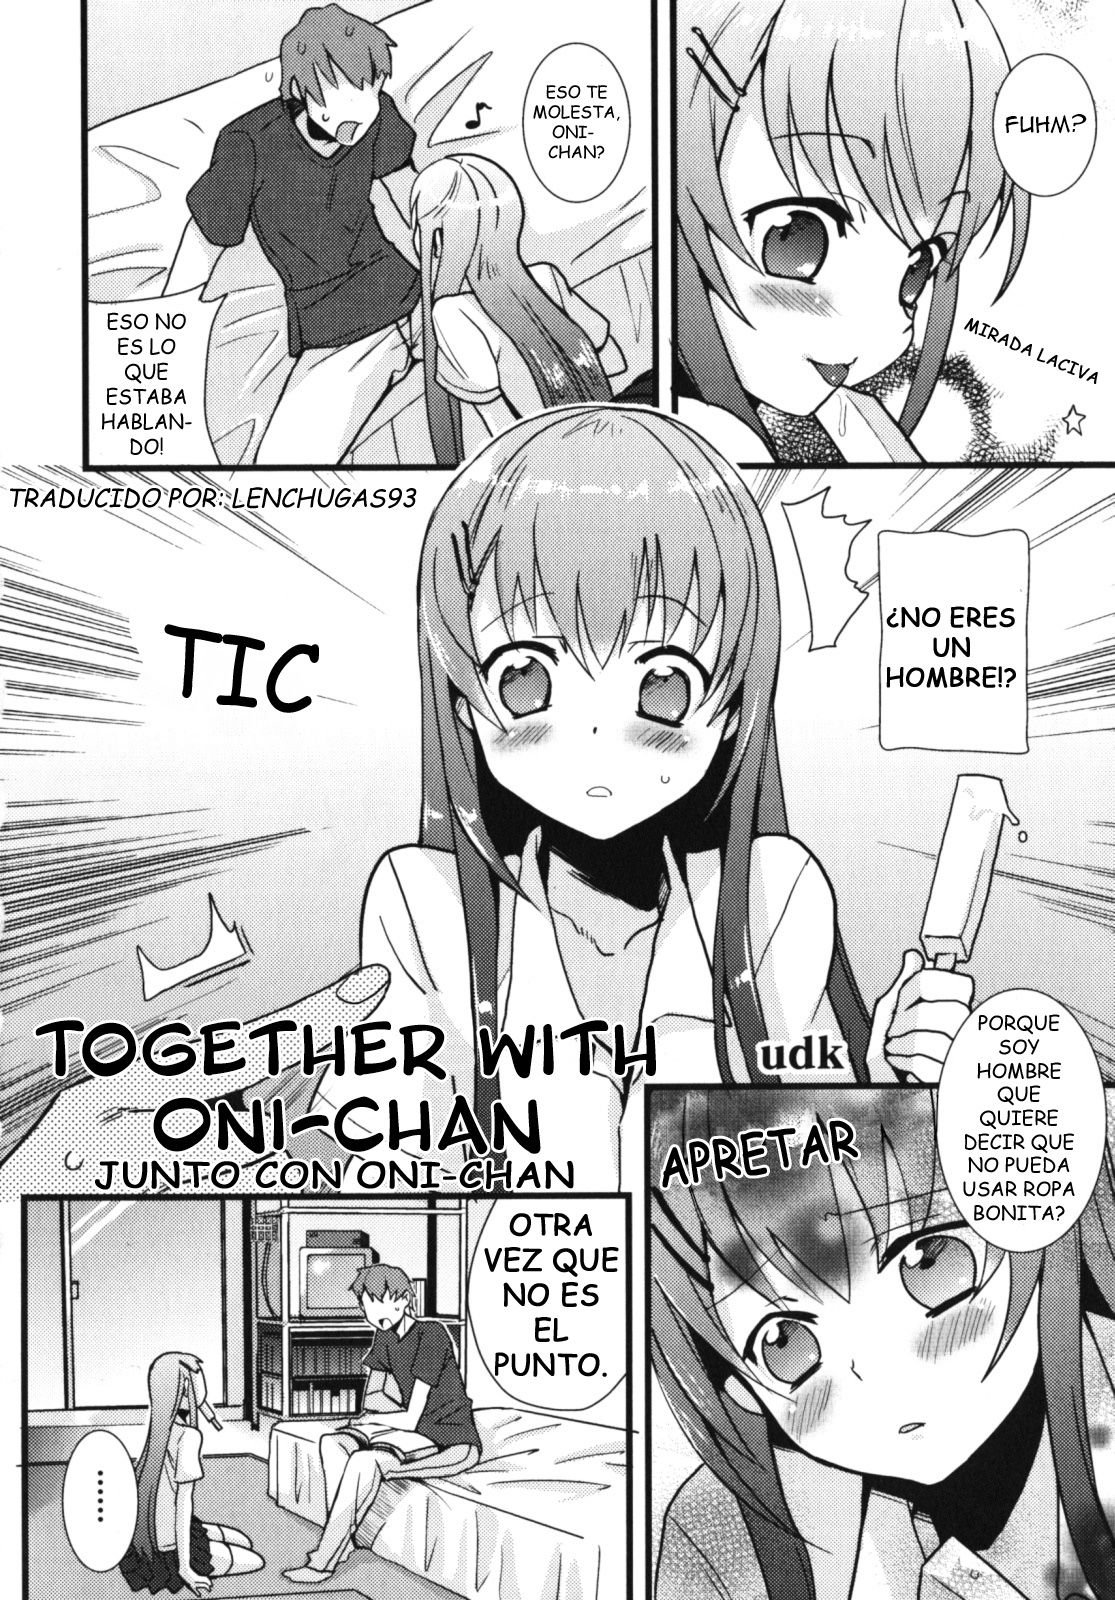 Onii-chan to Issho! - Junto con Oni-chan - 1